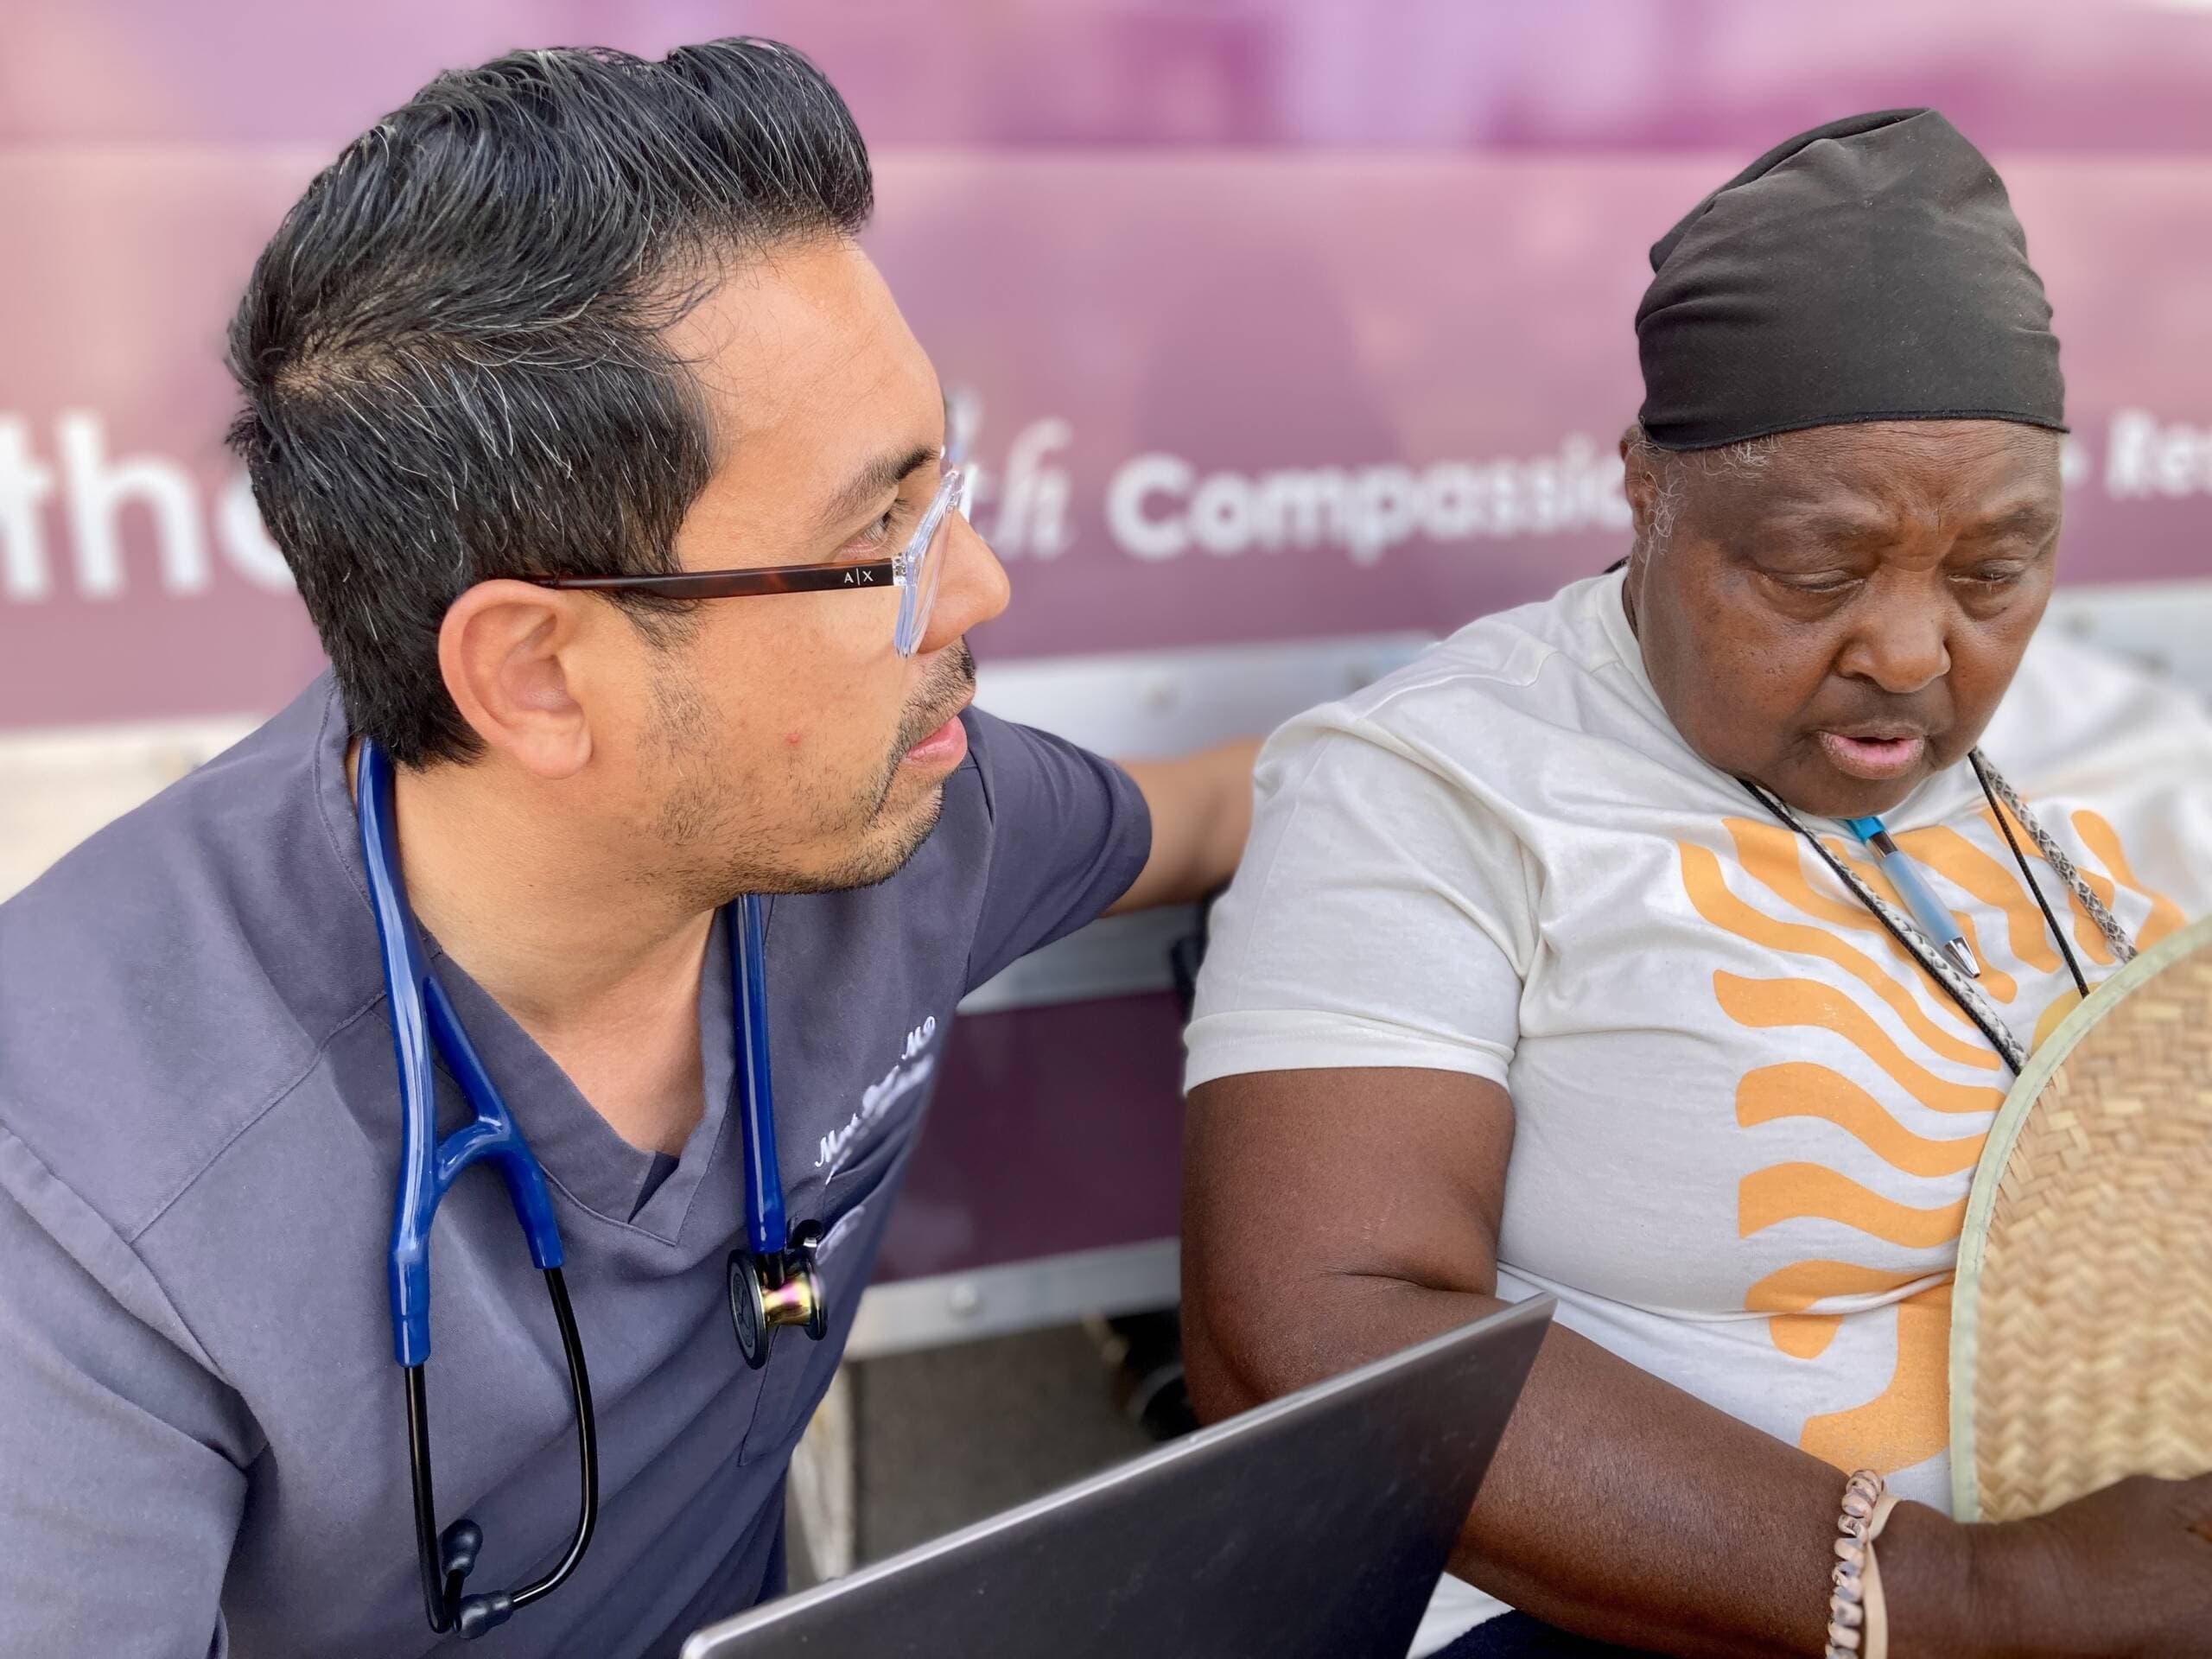 Dr. Mark Bueno discusses lab results with a patient who has come to his mobile medical unit in Phoenix, Ariz. (Peter O'Dowd/Here &amp; Now)